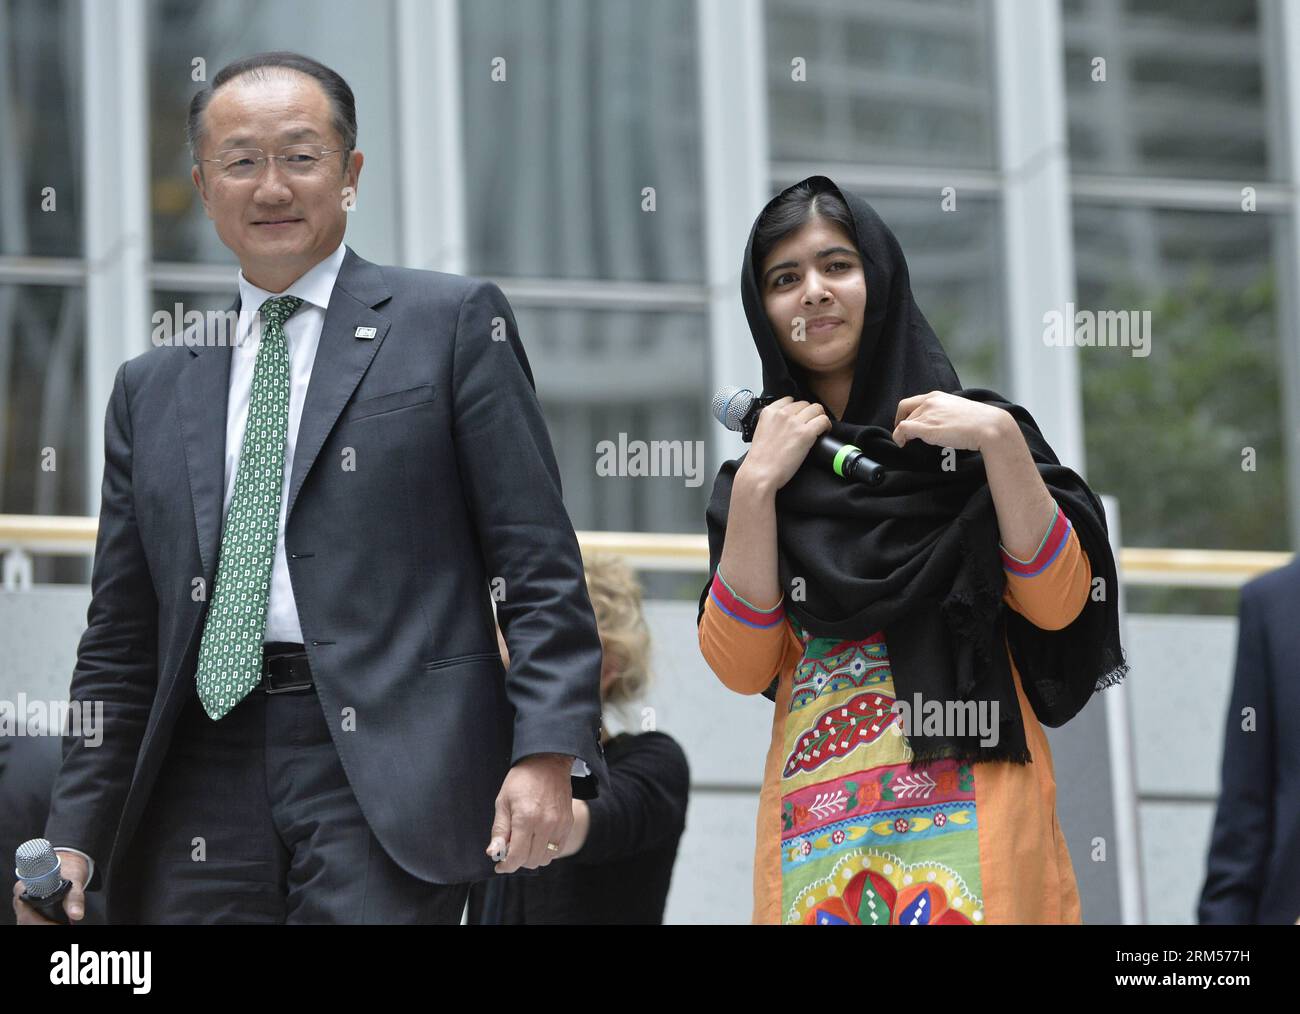 Bildnummer: 60590780  Datum: 11.10.2013  Copyright: imago/Xinhua WASHINGTON D.C.,  (Xinhua) -- World Bank President Jim Young Kim (L) and Malala Yousafzai, a 16-year-old Pakistani education activist who survived a Taliban attack, attend an International Day of the Girl event at World Bank headquarters during the 2013 World Bank Group-IMF Annual Meetings in Washington D.C., capital of the United States, . (Xinhua/Zhang Jun) US-WASHINGTON-WORLD BANK-PAKISTAN-MALALA PUBLICATIONxNOTxINxCHN Gesellschaft Politik People PK premiumd x0x xrj 2013 quer     60590780 Date 11 10 2013 Copyright Imago XINHUA Stock Photo